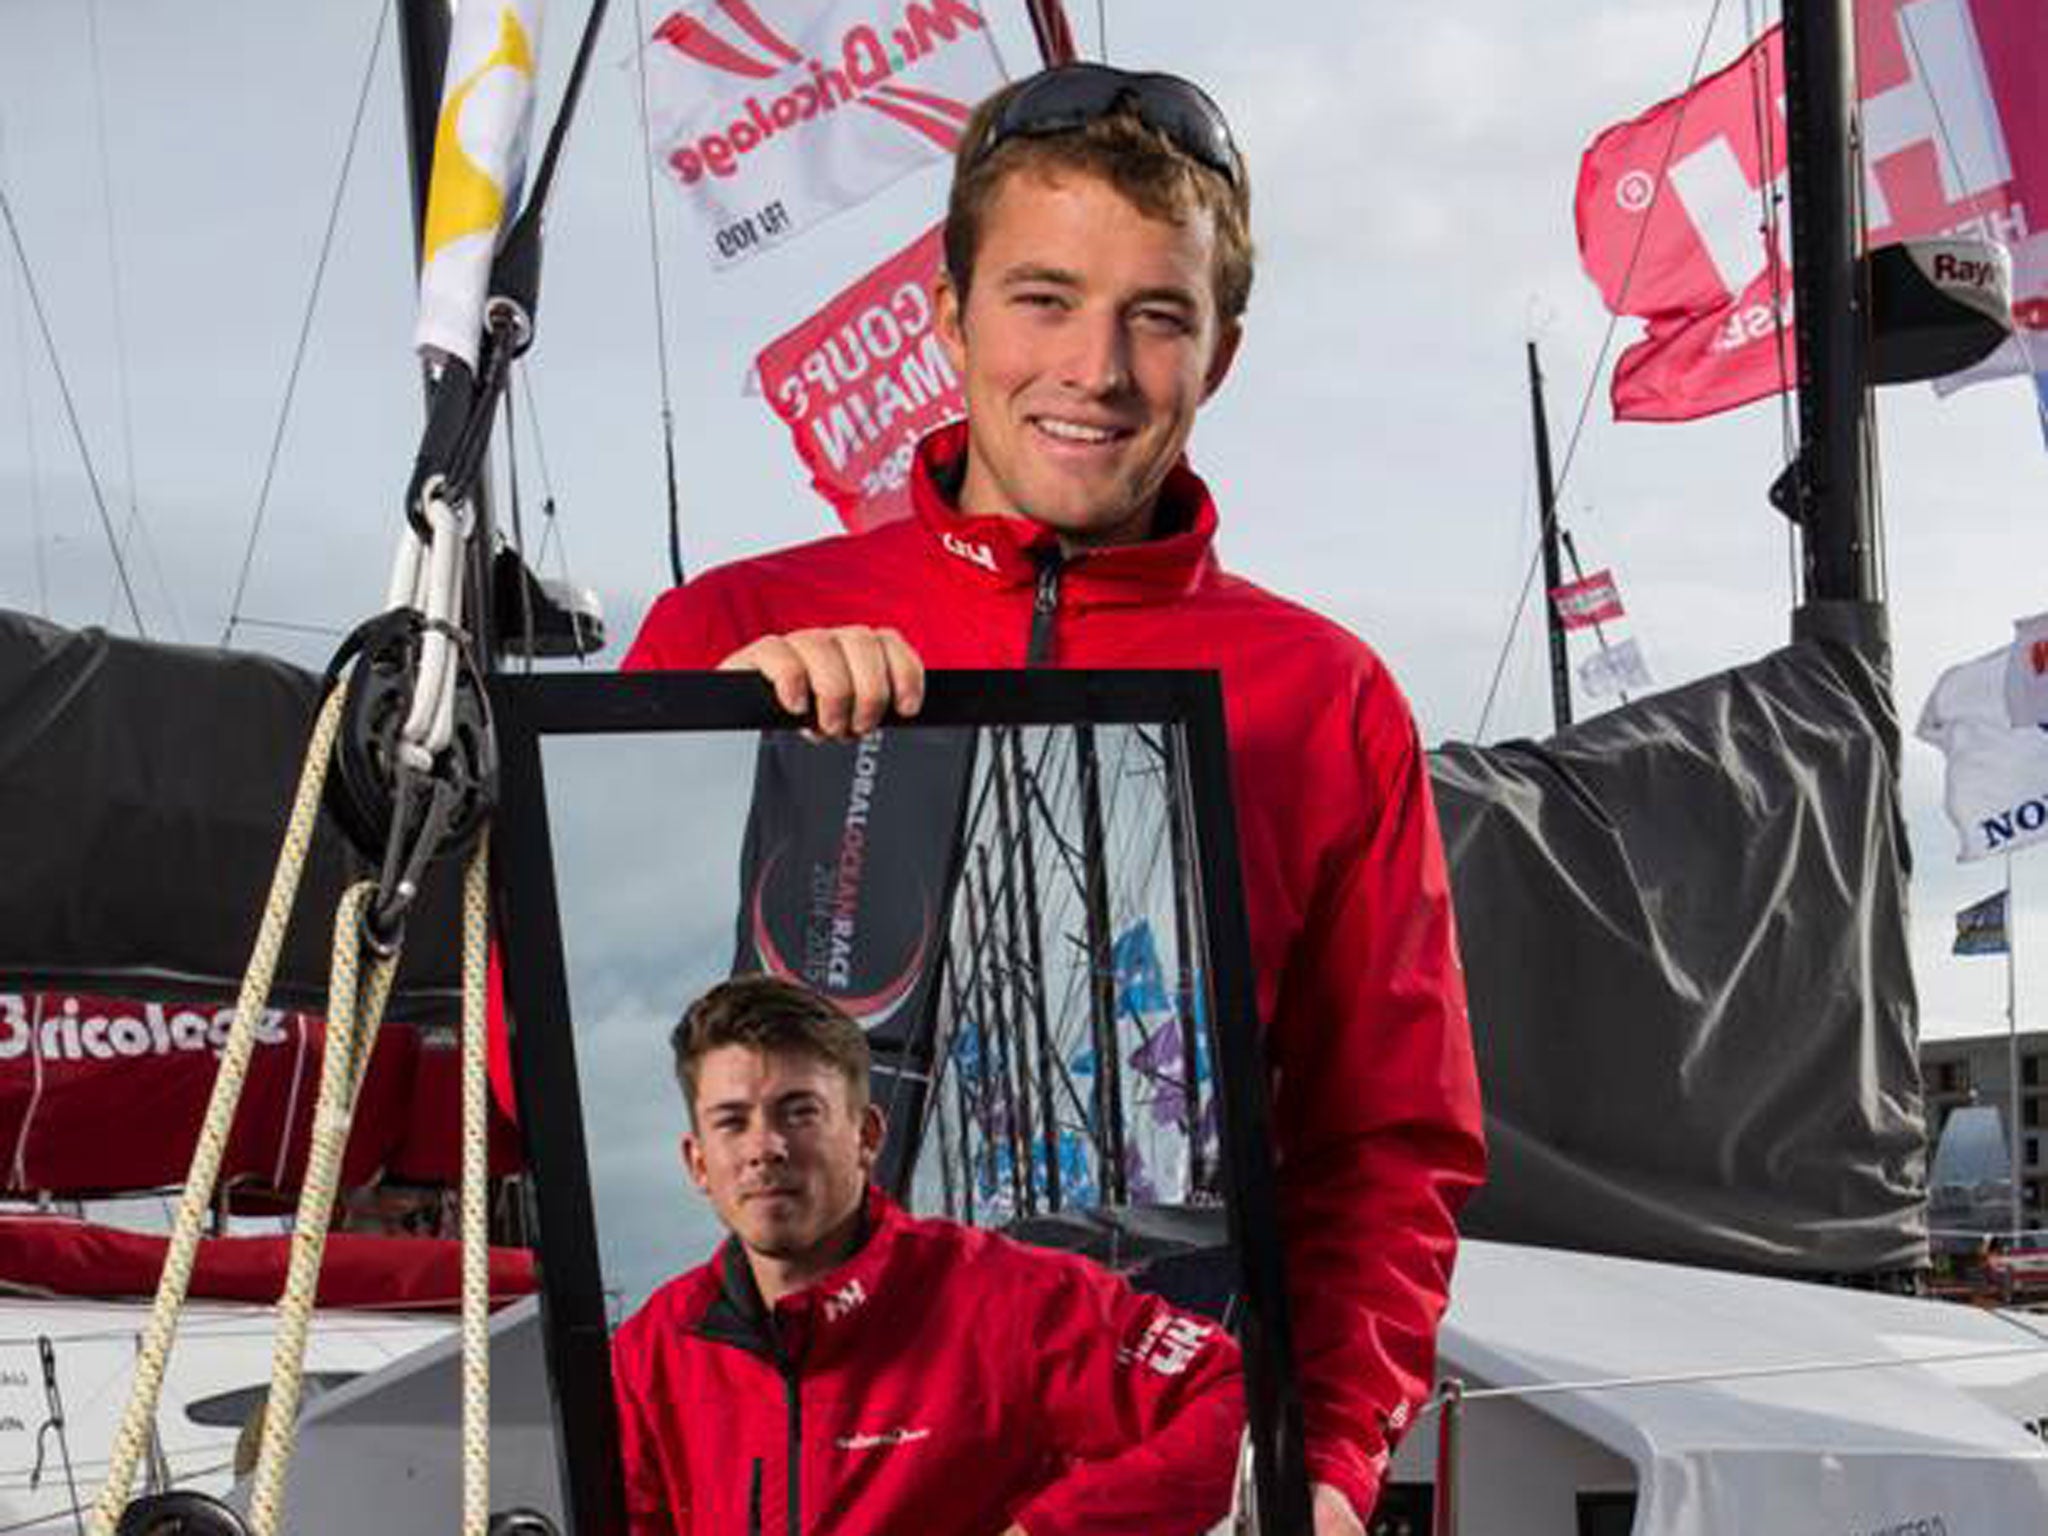 Sam Goodchild (top) will mirror co-skipper Ned Collier Wakefield’s ambitions to hit the front of the Class 40 division in the Transat Jacques Vabre from Le Havre to Itajai, Brazil.